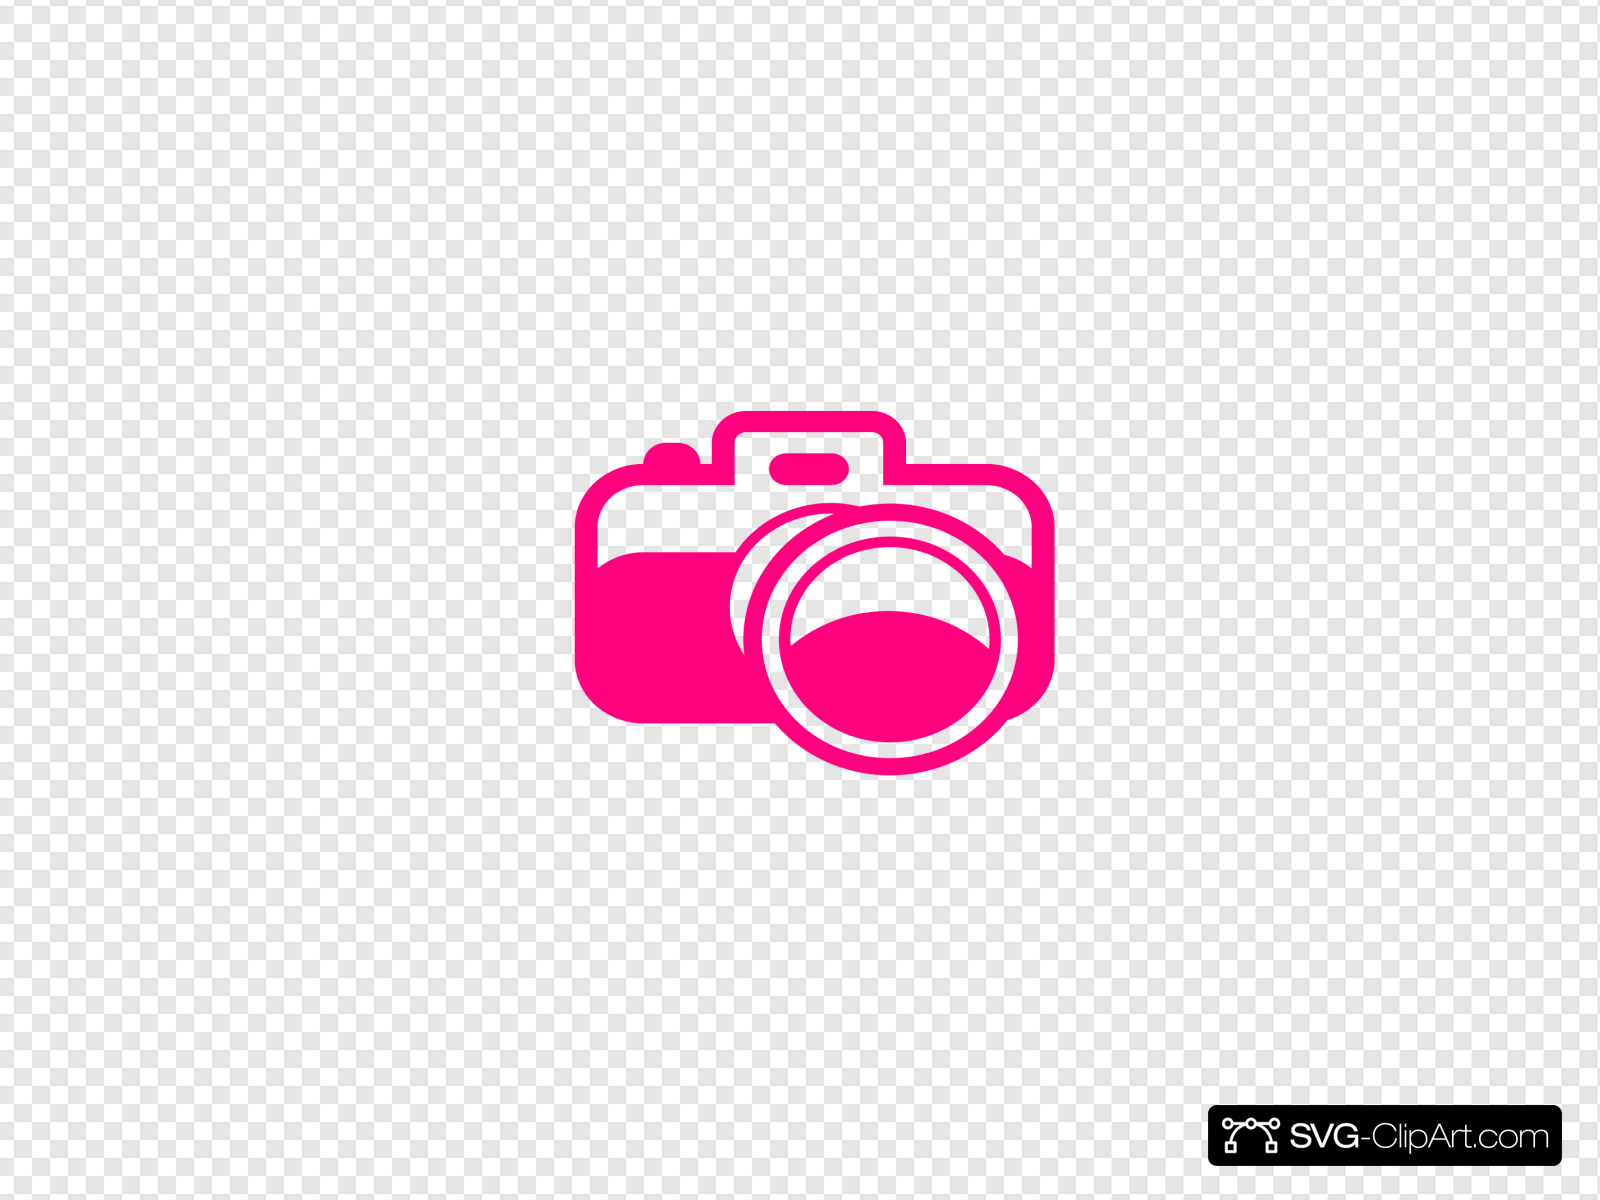 Pink Camera Clip art, Icon and SVG.